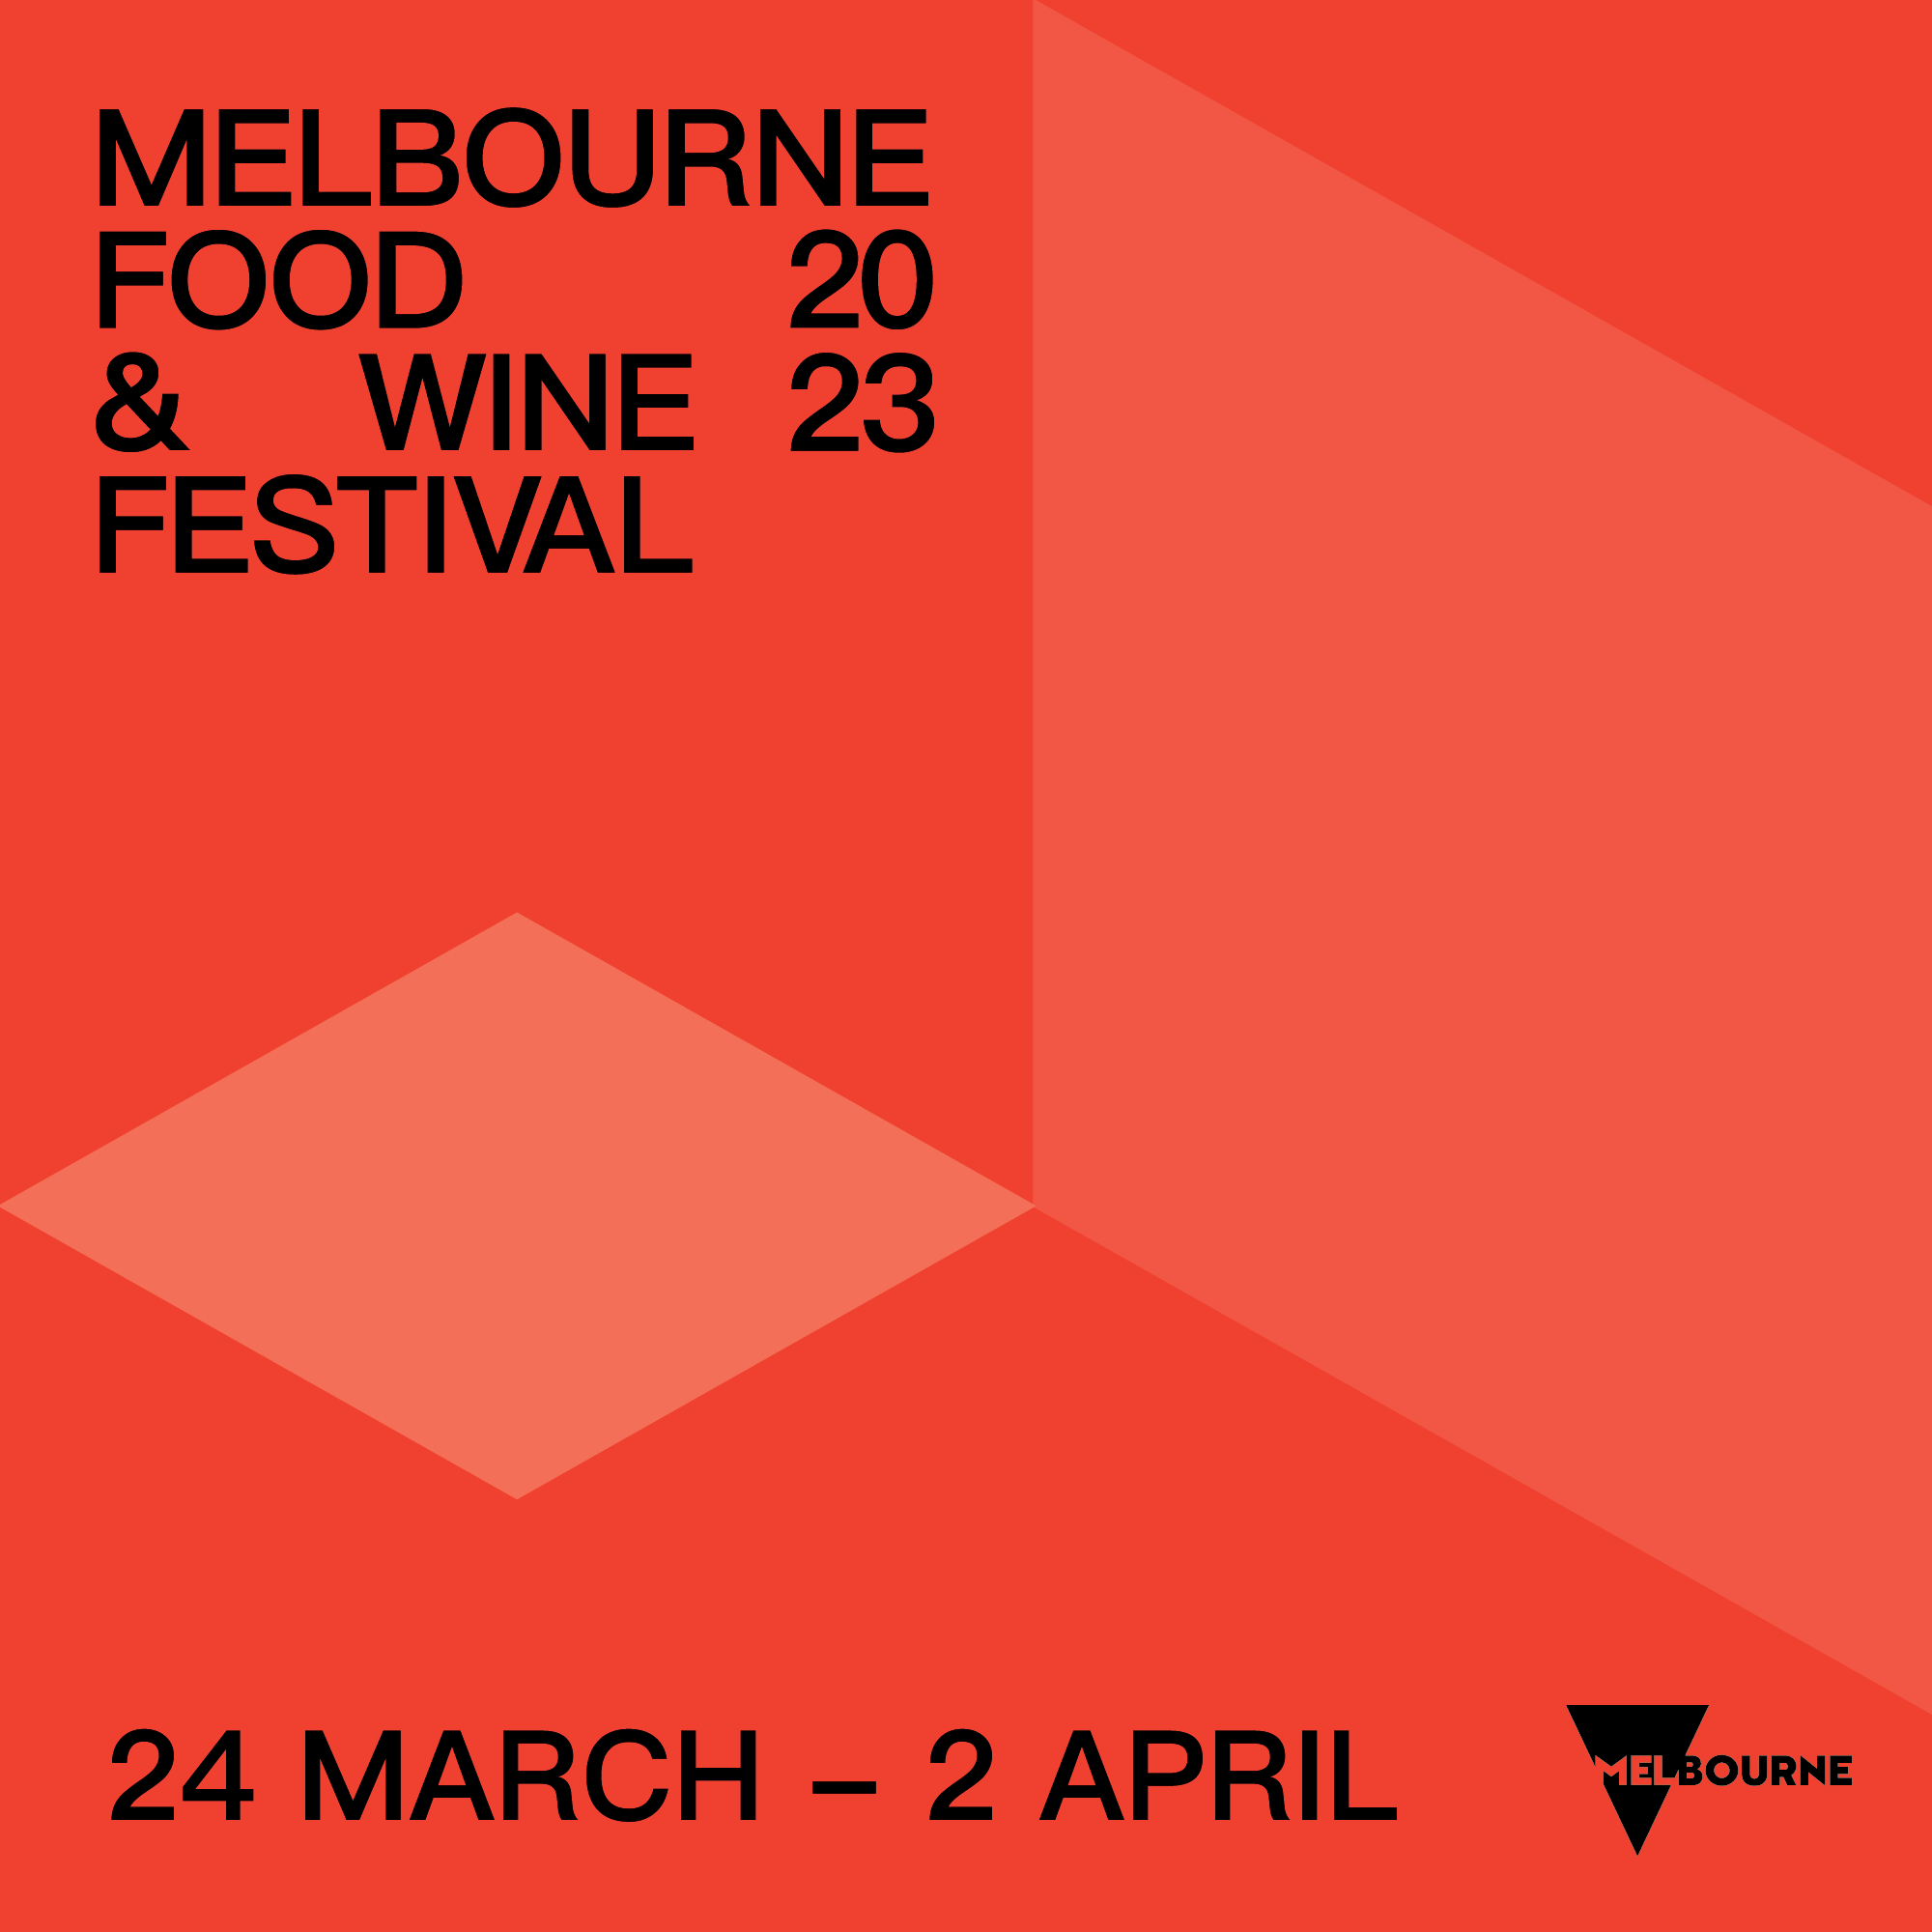 Imogen's for Melbourne Food and Wine Festival events